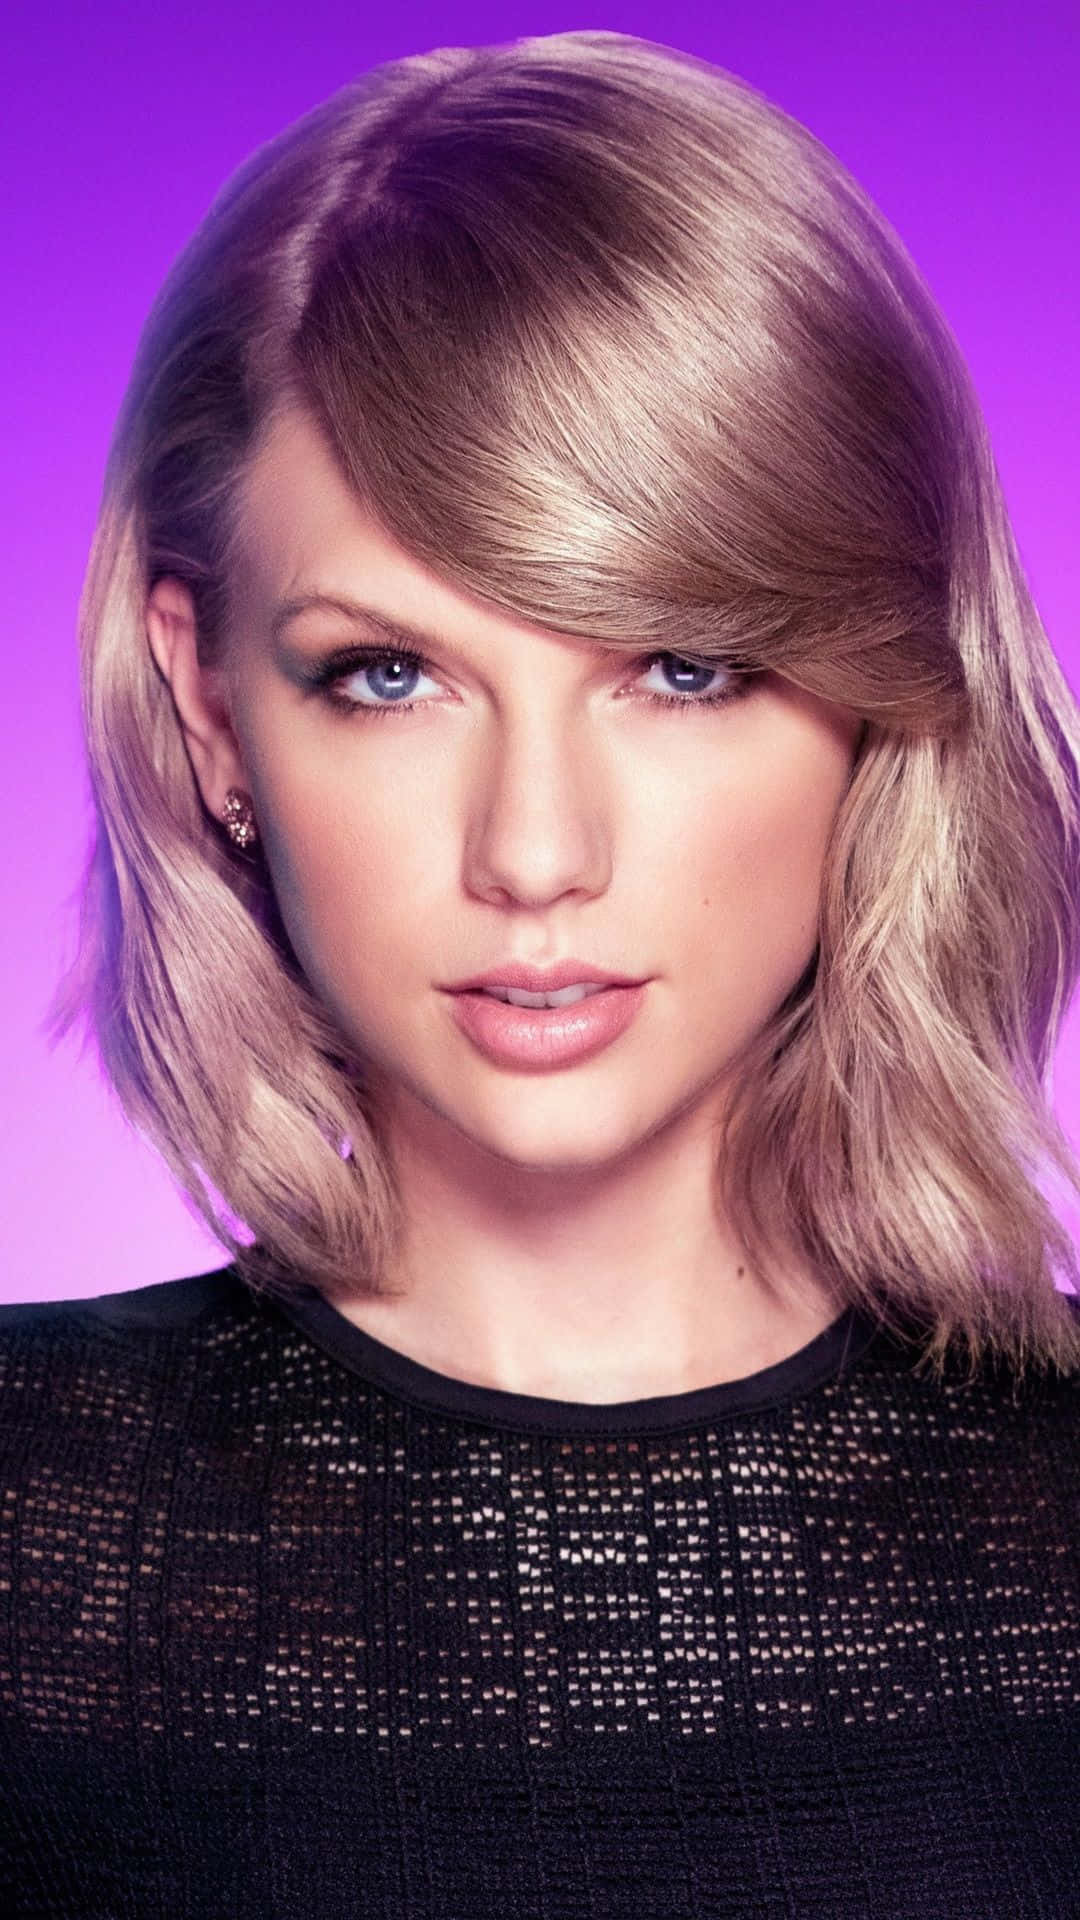 Taylor Swift Stars in Eye-Catching iPhone Promotion Wallpaper